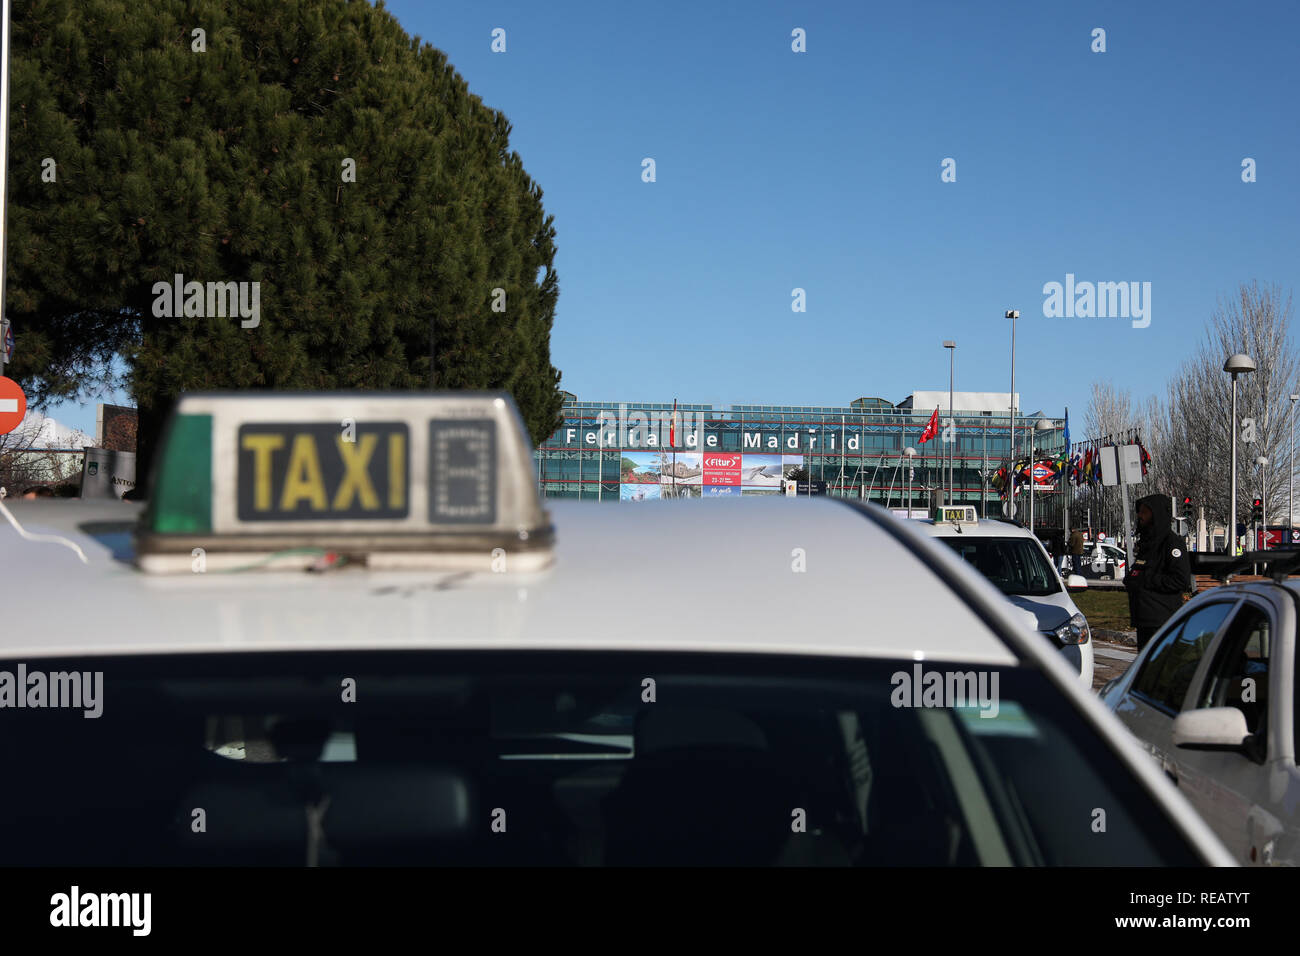 Madrid, Spain. 21st January, 2019. The IFEMA fairground collapsed with all the taxis waiting for negotiations with the Community of Madrid. The taxi drivers from Madrid, who have started a strike on Monday, have announced that they maintain the indefinite strike after reaching no pre-agreement with the president of the Community of Madrid Credit: Jesús Hellin/Alamy Live News Stock Photo